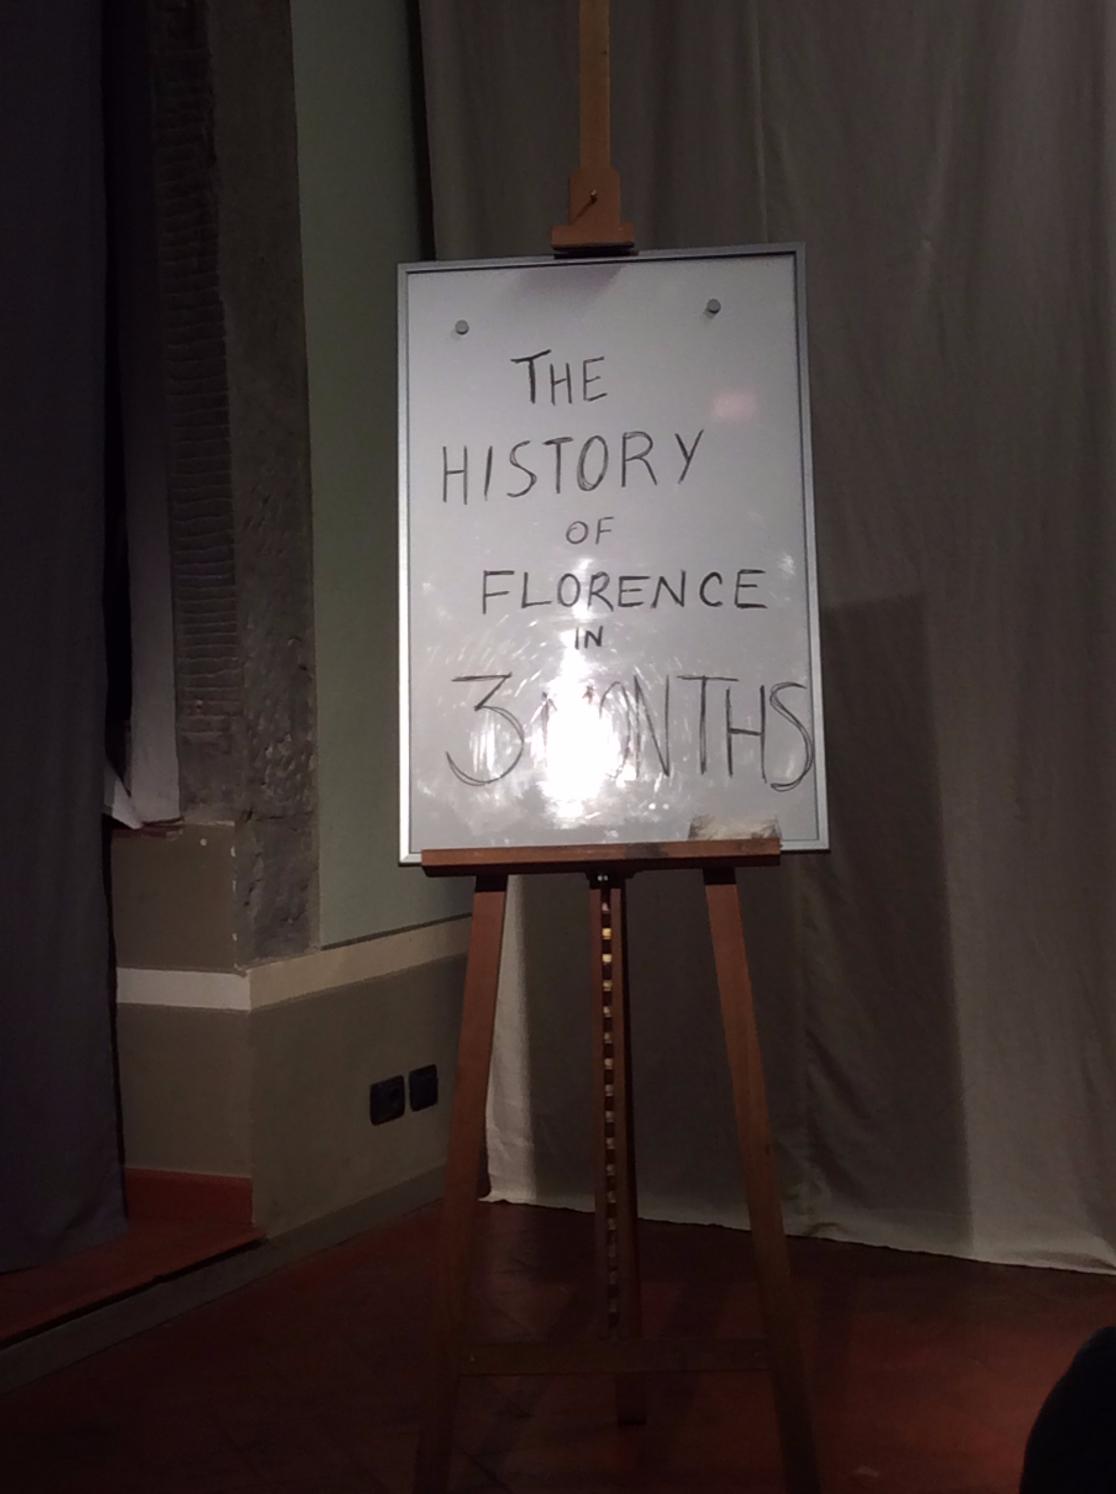 The History of Florence in 60 Minutes